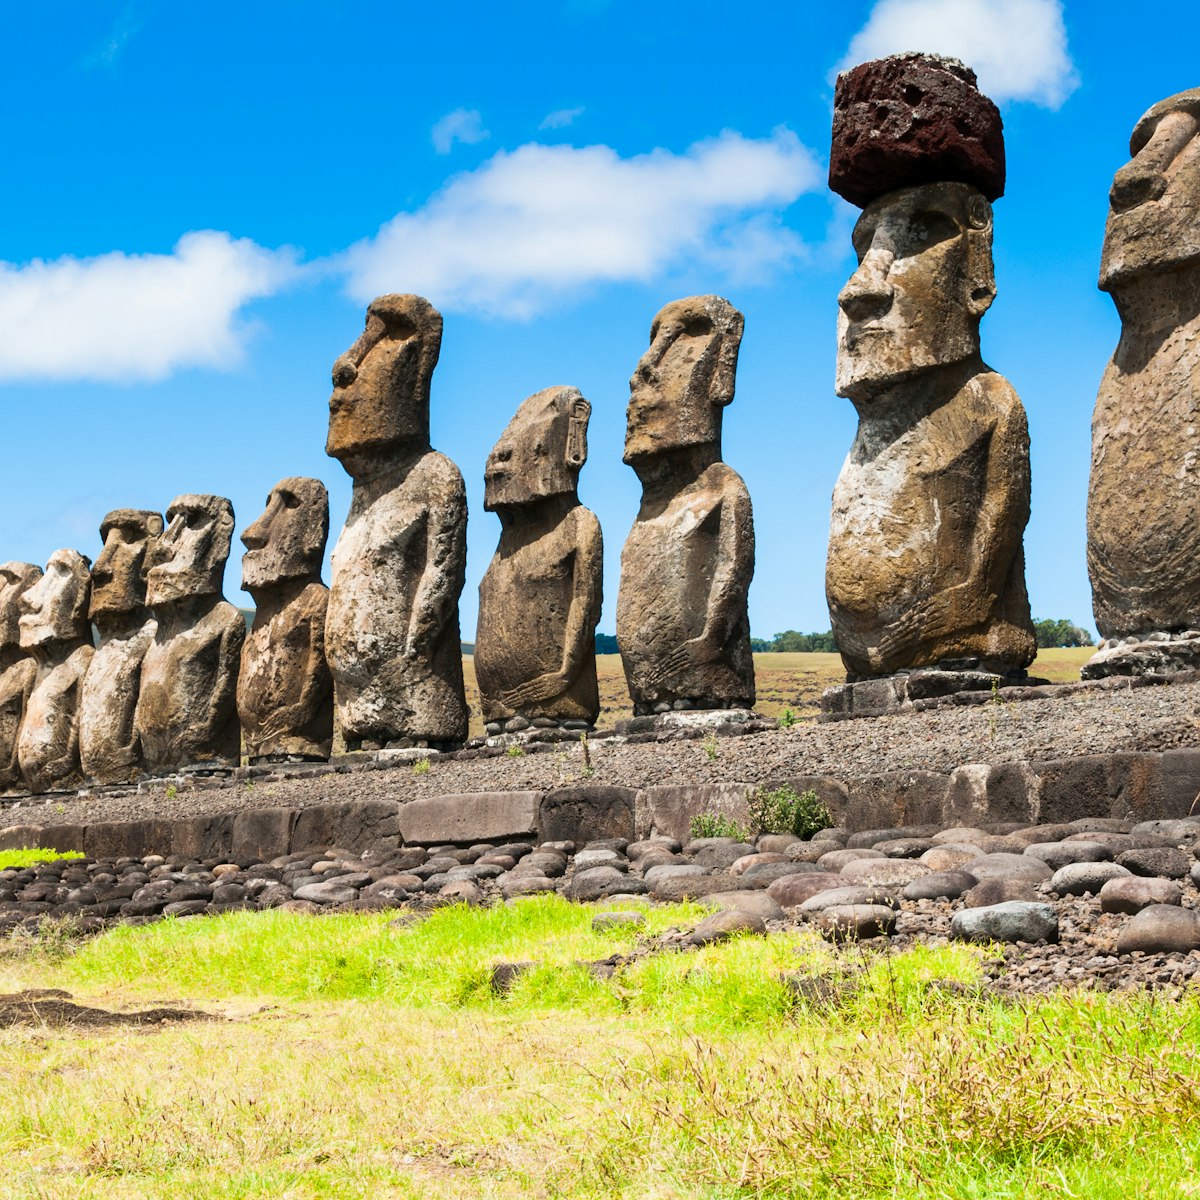 Moais of Ahu Tongariki, Easter Island.
Travel Destinations Horizontal The Americas South America Sculpture Statue Chile Famous Place International Landmark Cultures Island Easter Island Moai Statue Ahu Tongariki No People Photography Polynesian Culture UNESCO World Heritage Site